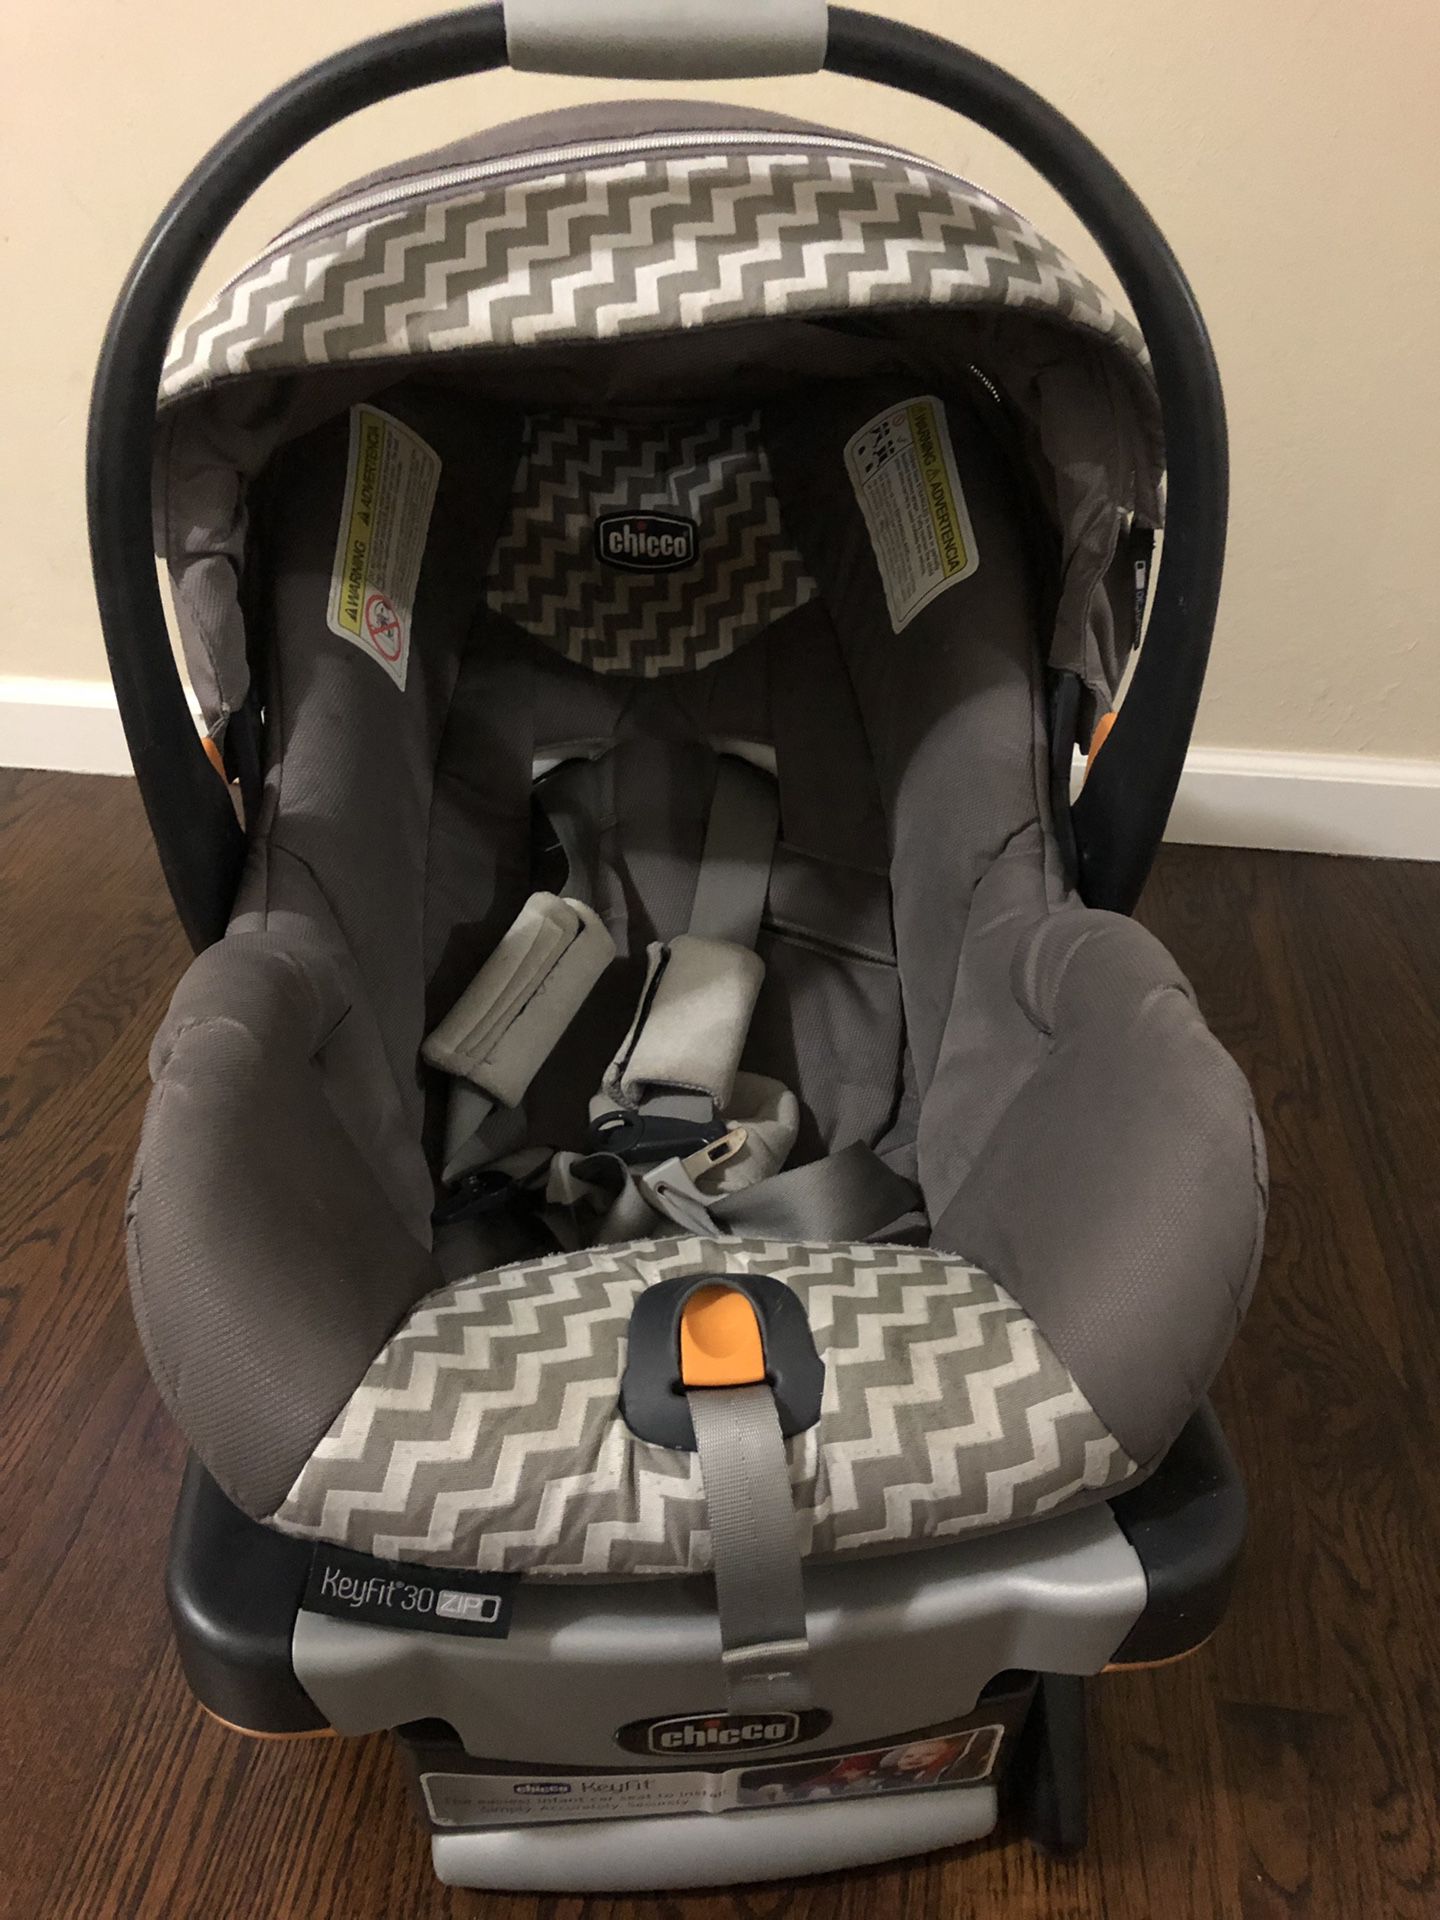 Chicco Keyfit 30 infant car seat